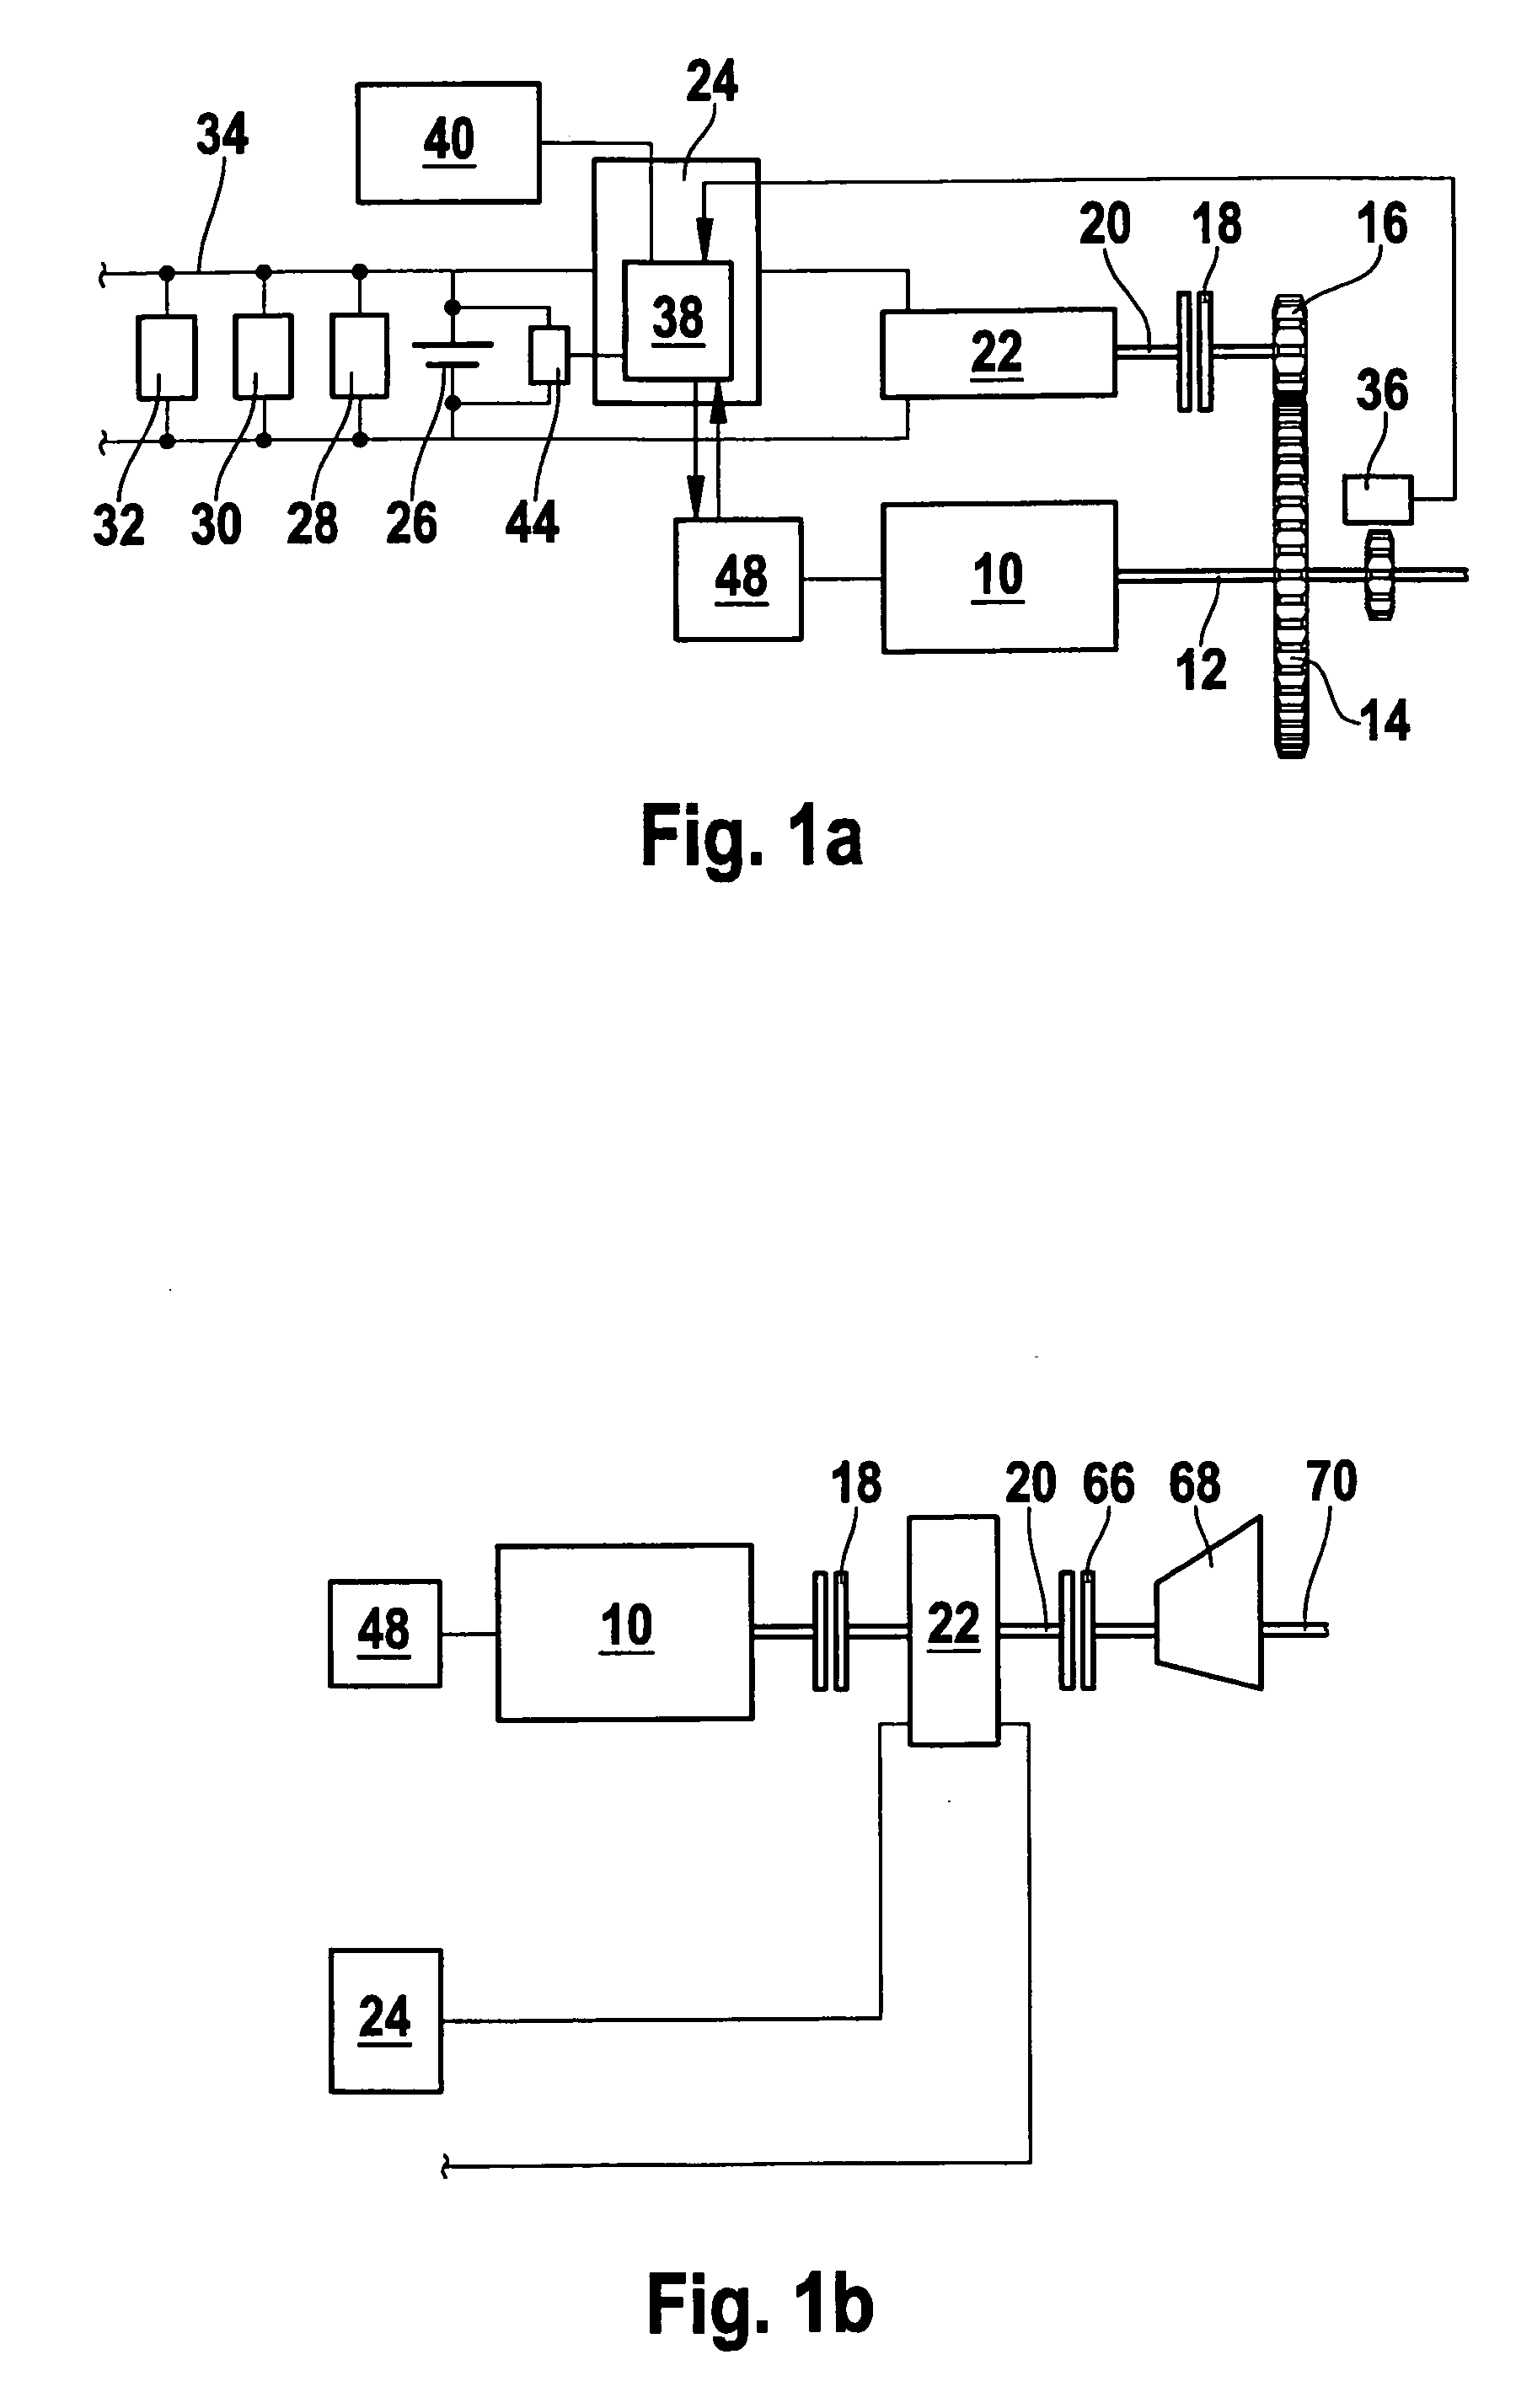 Motor Vehicle Having a Hybrid Drive, and Method for Operating a Hybrid Drive